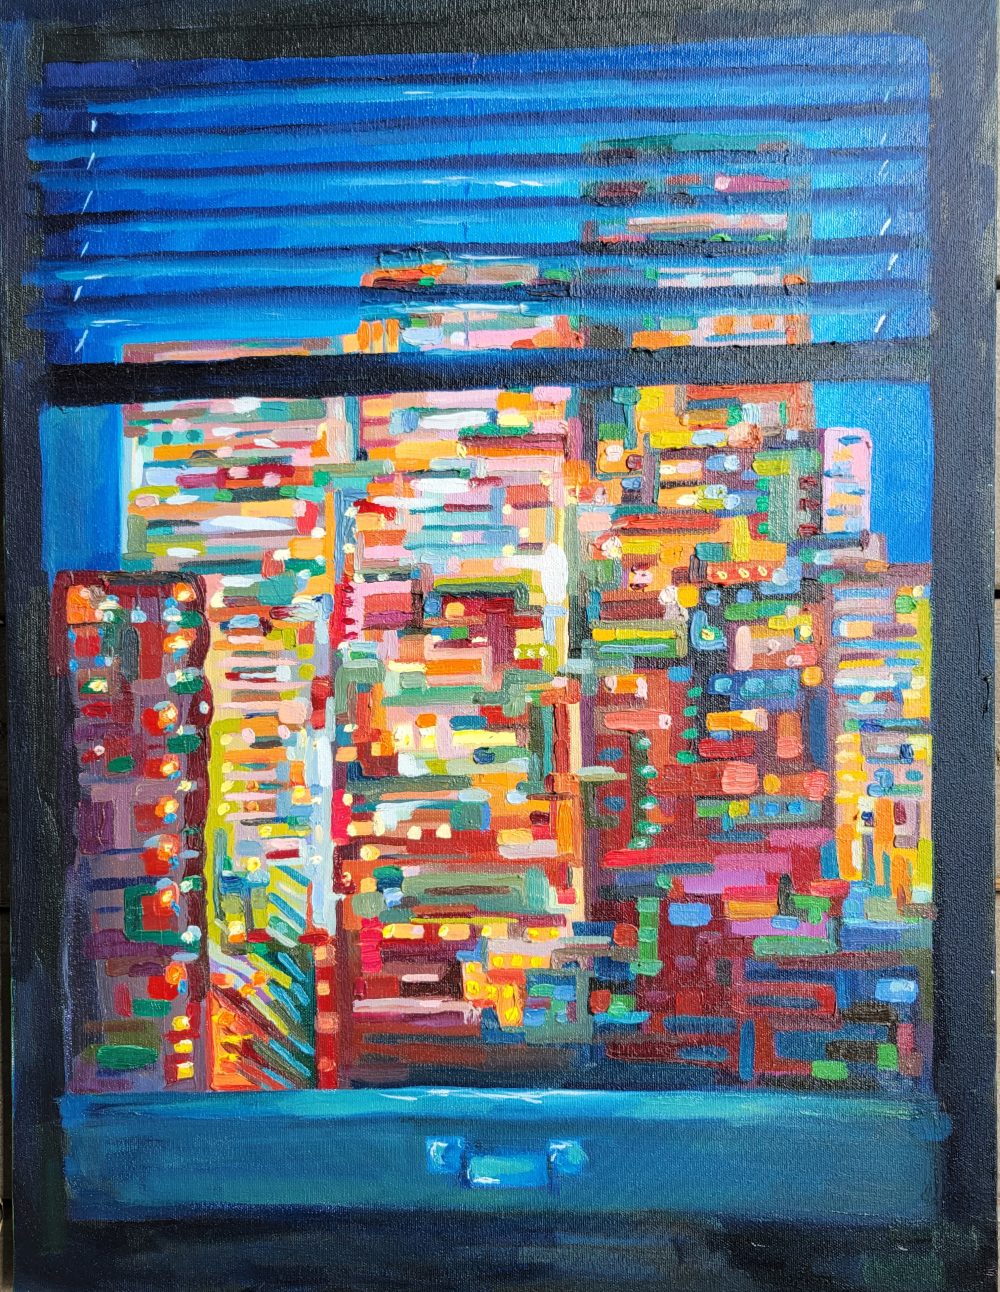 An oil painting of a city scape at night through the perspective of a window. I experimented with more abstract shapes and colors with accentuated brush strokes, creating a sense of dreaminess as if someone who had just woken up and hadn't yet wiped the sleep from their eyes peering through their window.